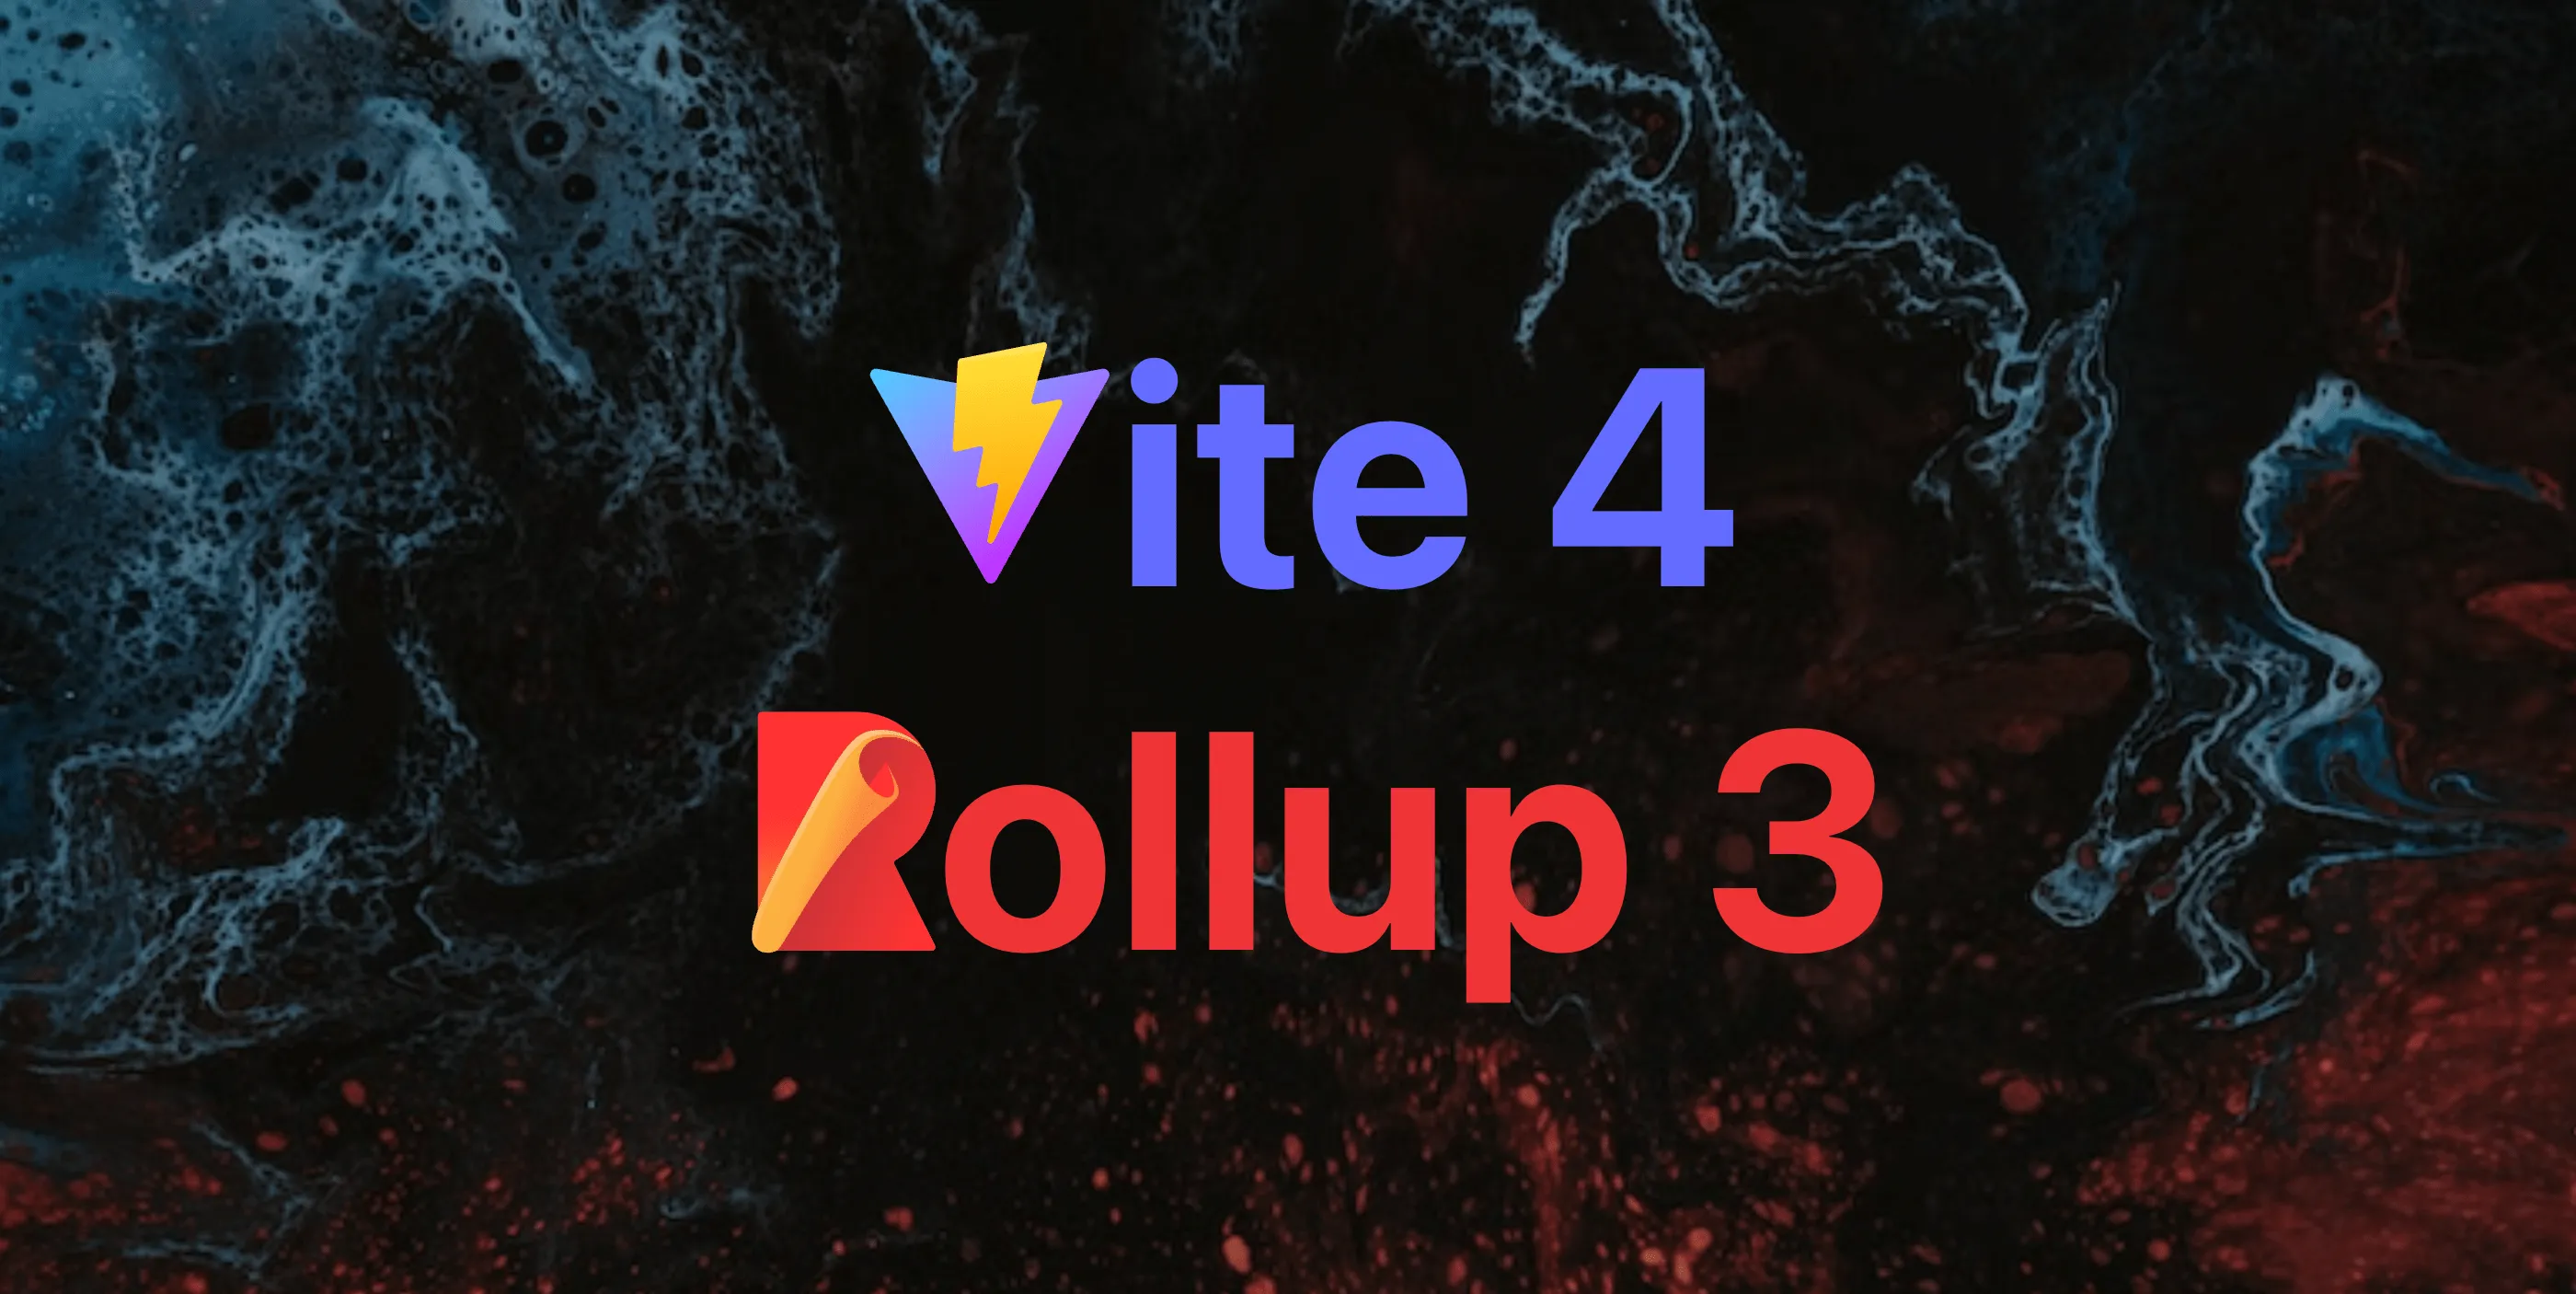 Vite 4 is out